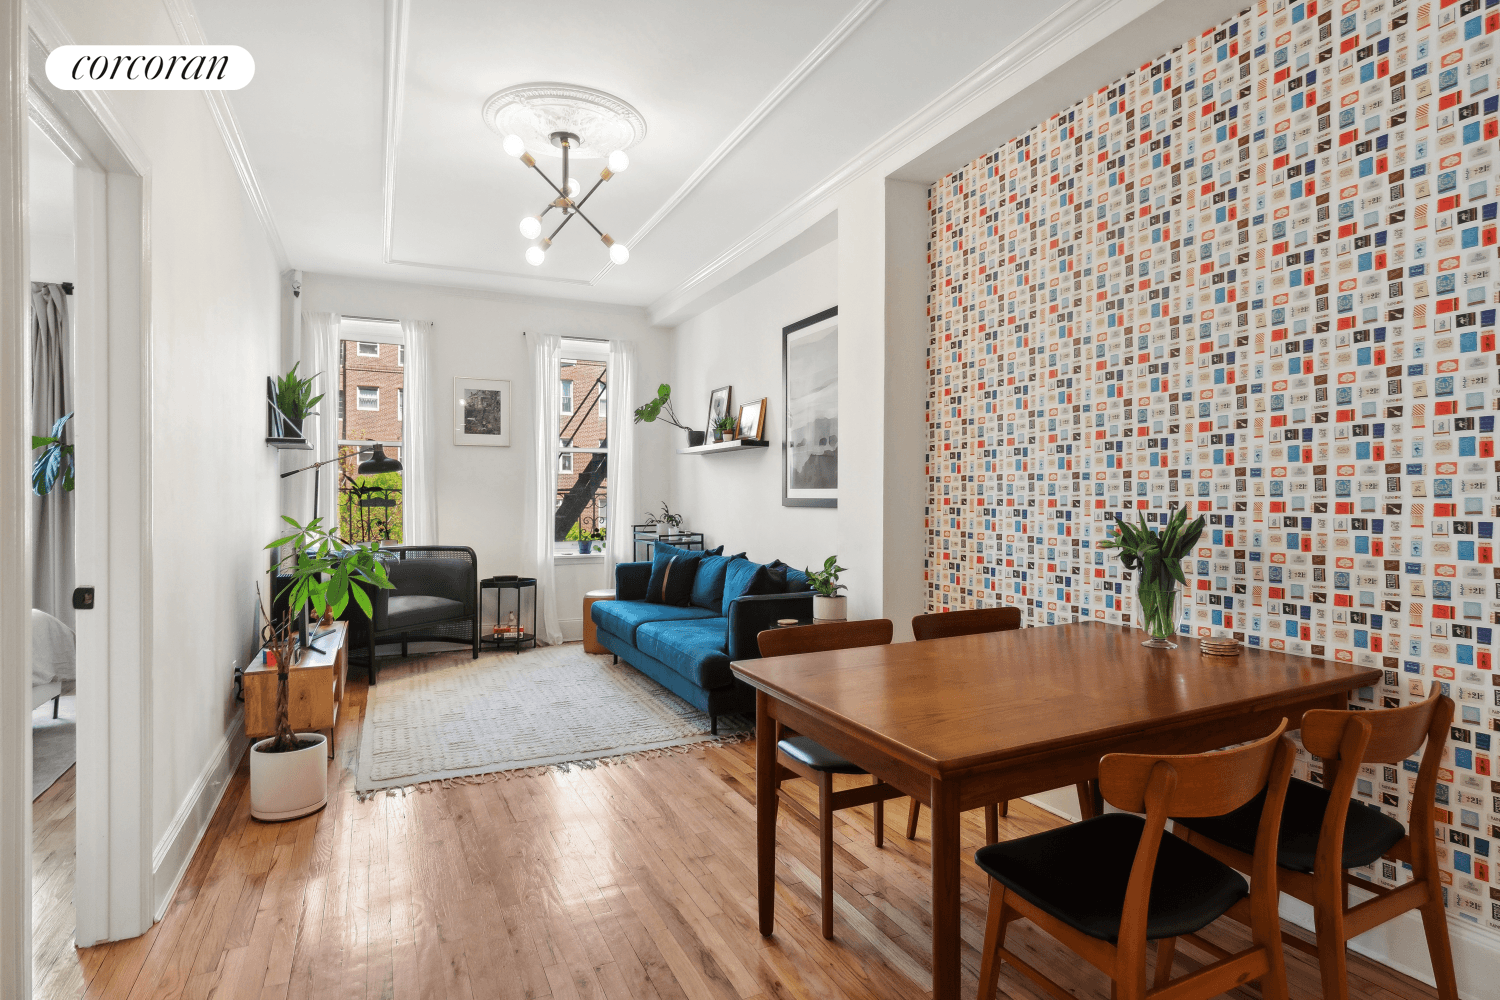 Welcome to Unit 3D at 274 Saint John's Place, An Absolute Gem Nestled in the Heart of the Well Loved Neighborhood of Prospect Heights !